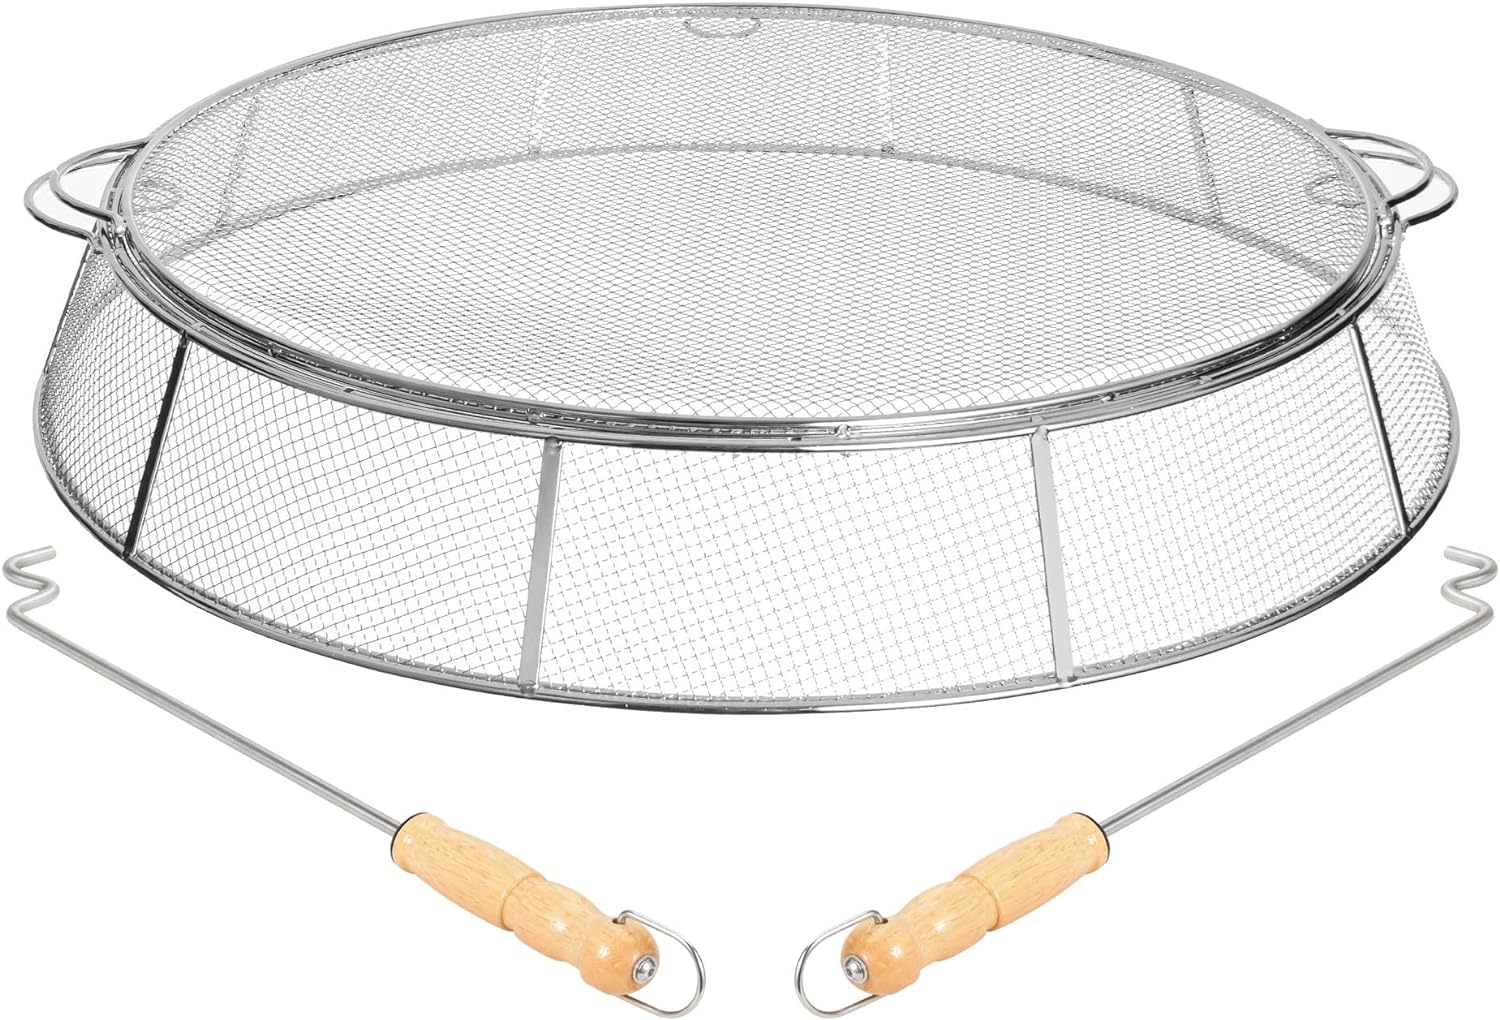 Fire Pit Spark Protector Screen Review